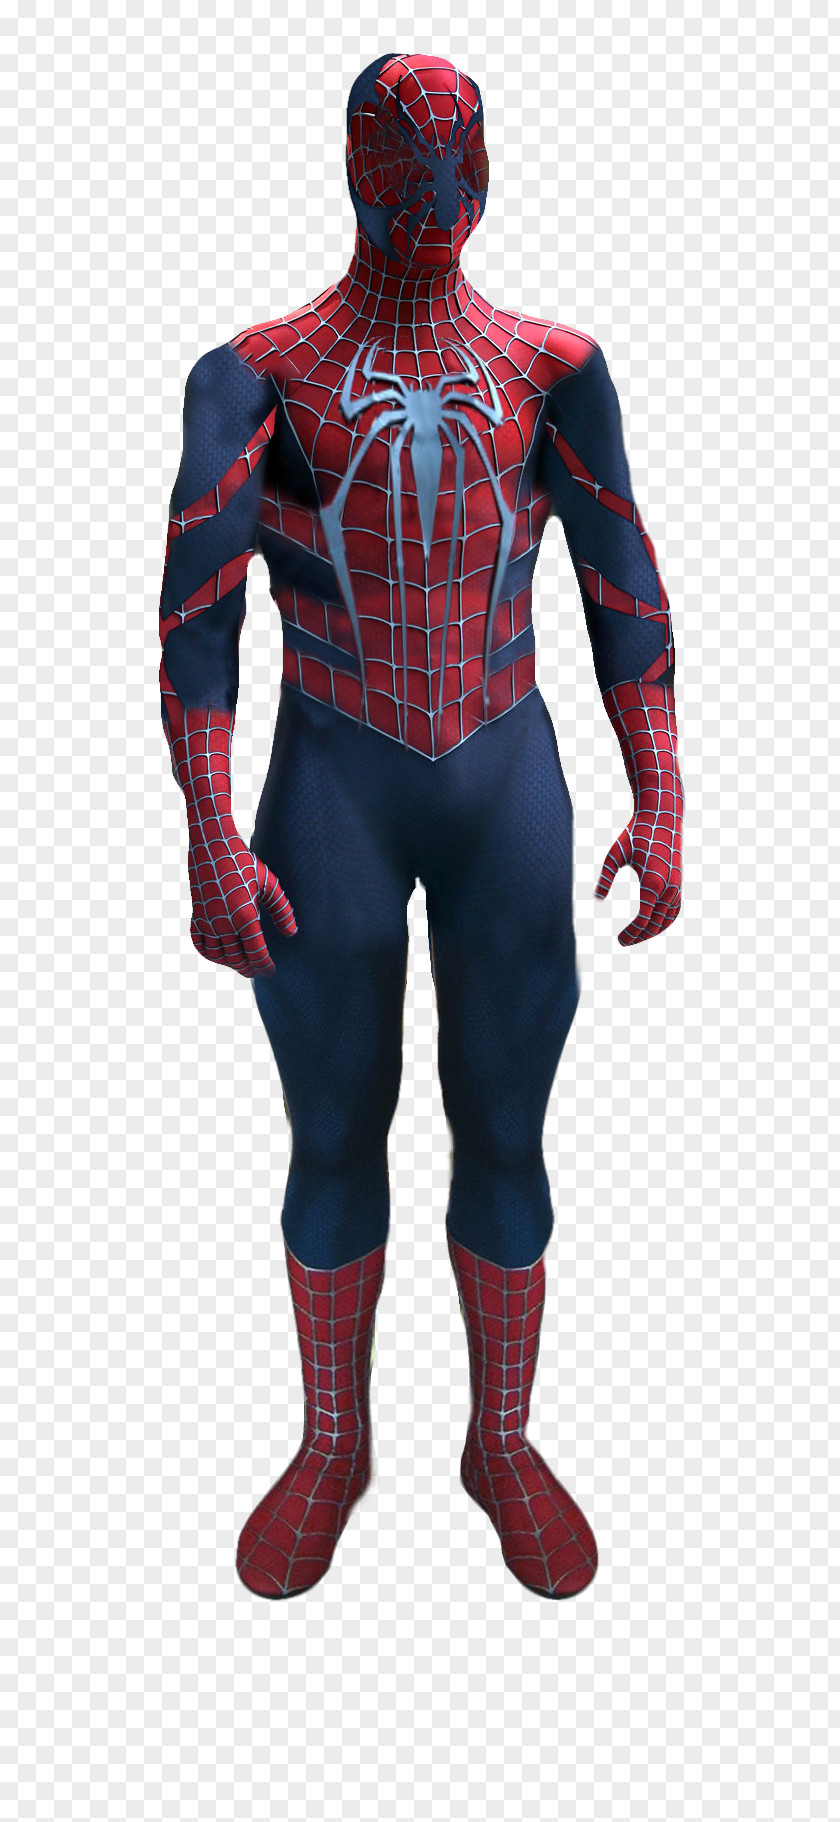 Iron Spiderman Civil War: The Amazing Spider-Man Concept Art Ultimate Drawing PNG